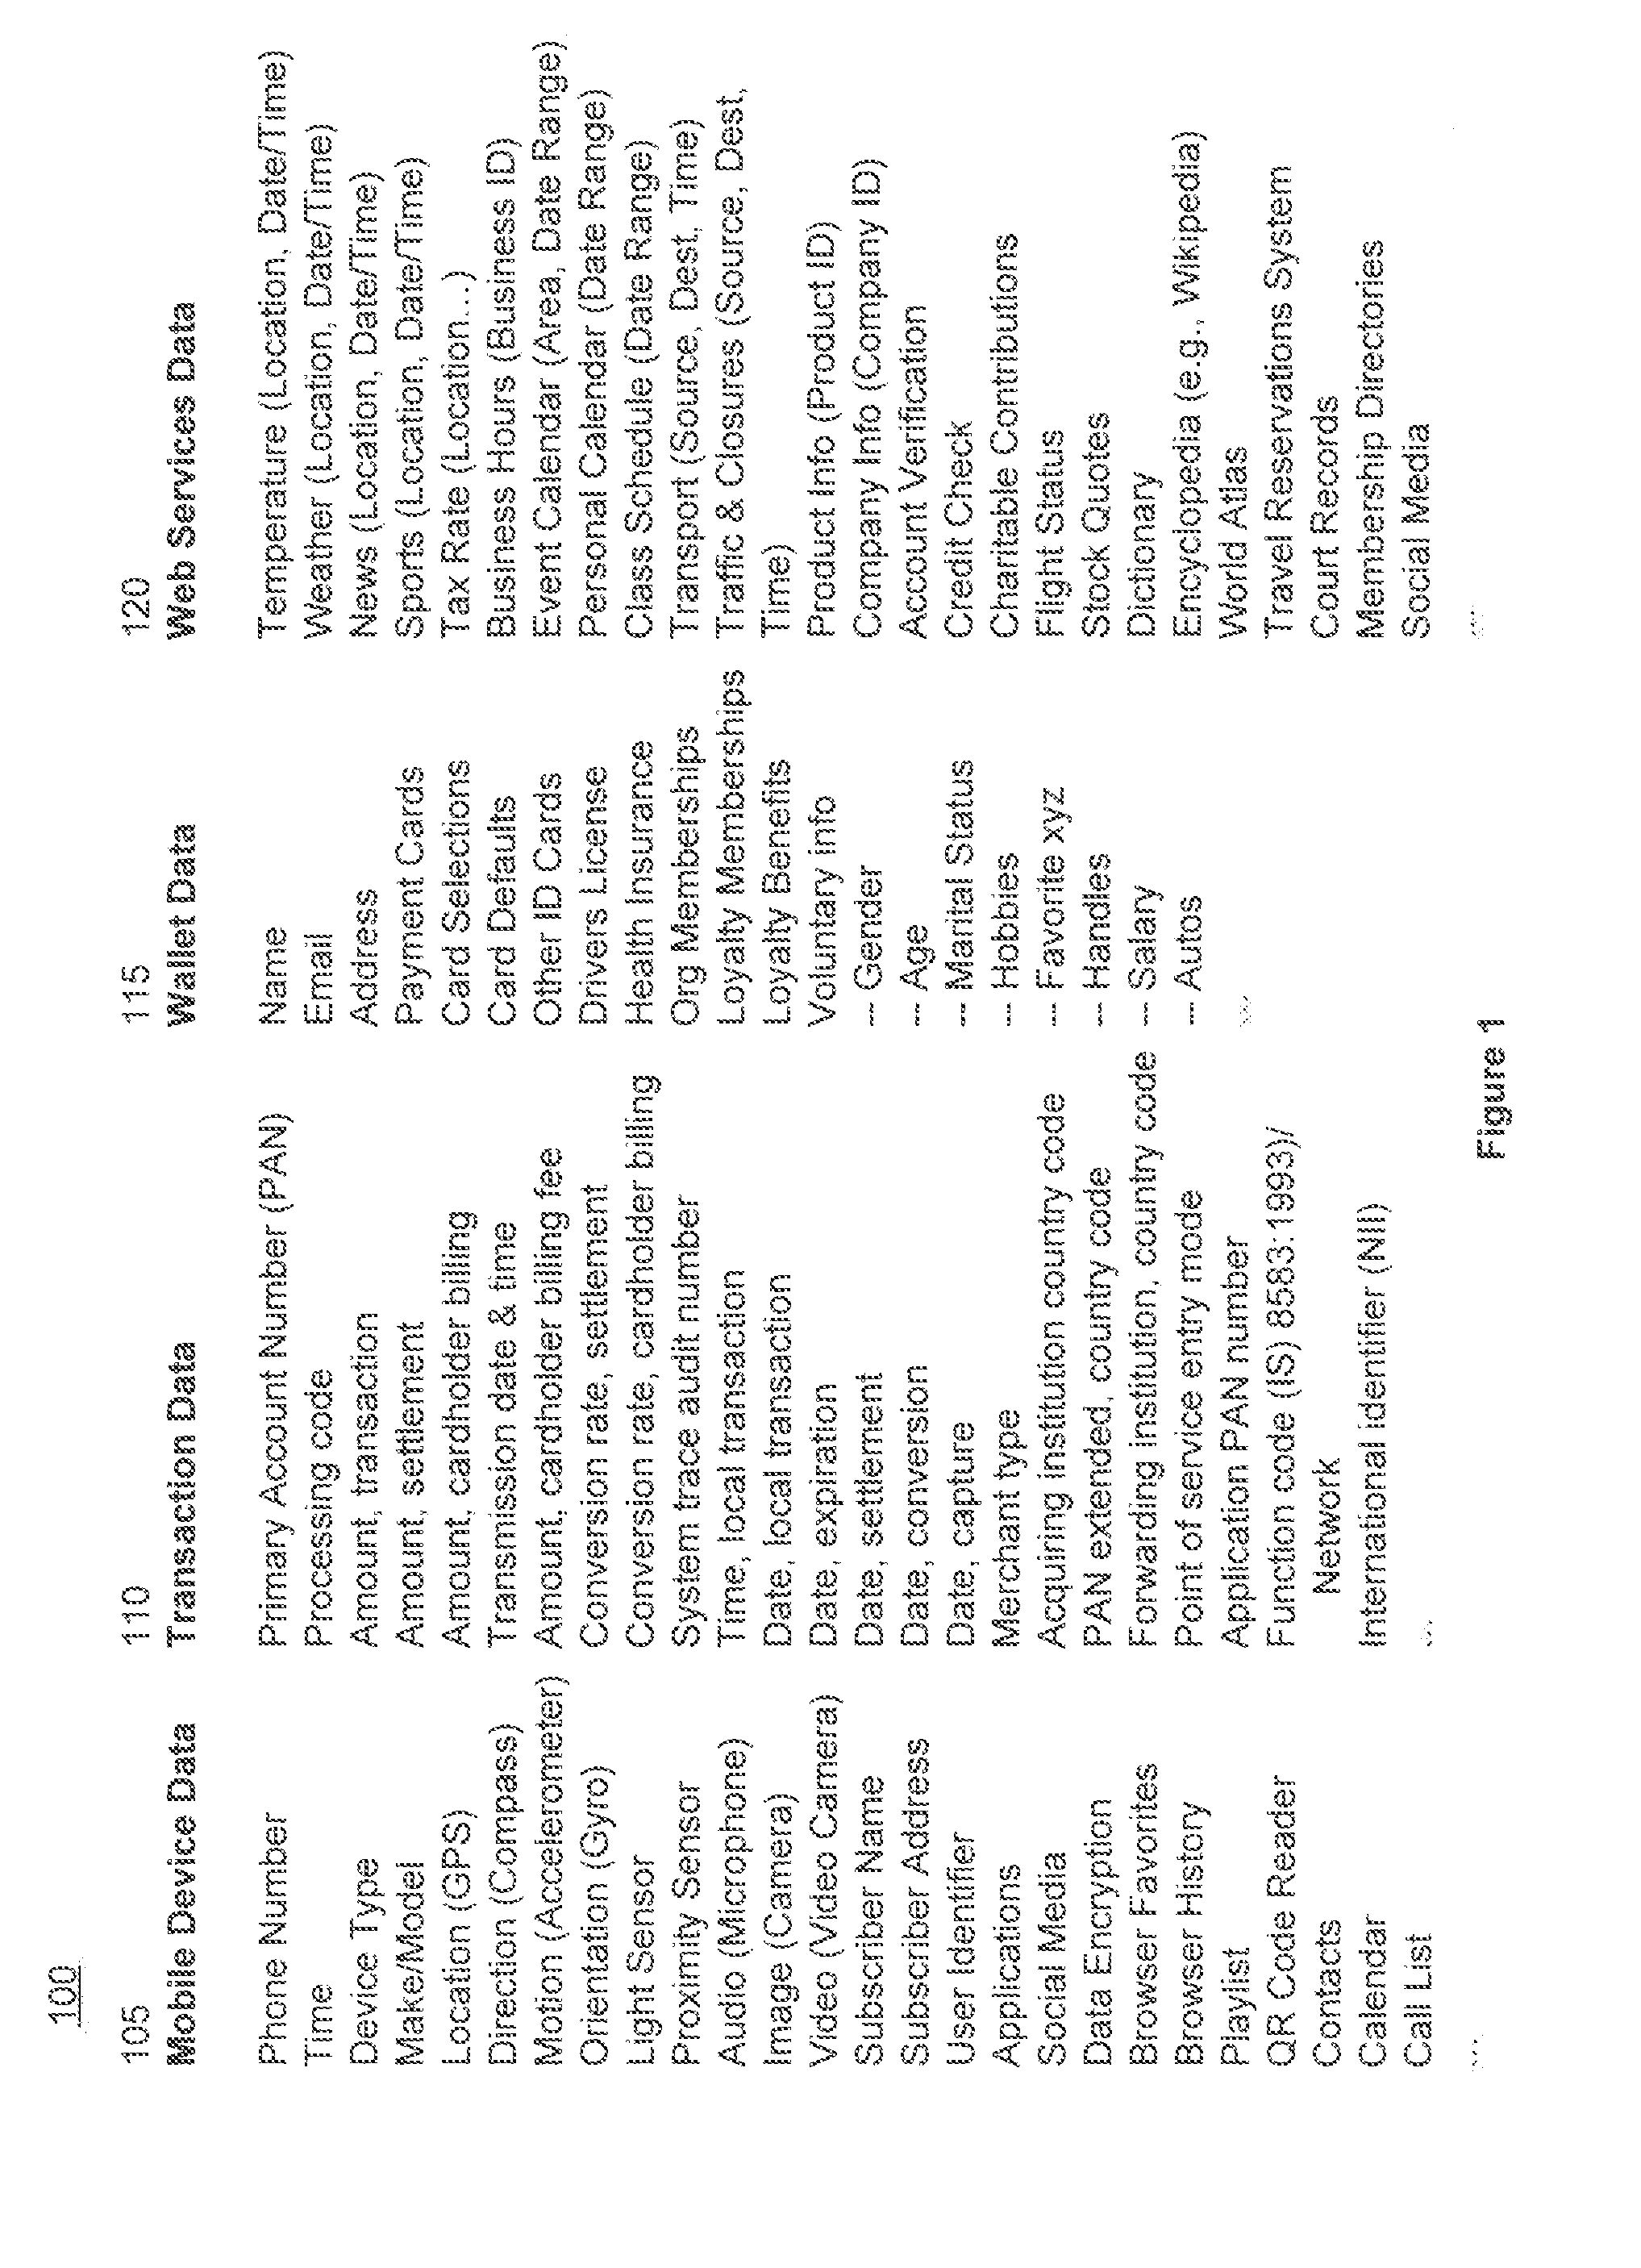 System and method for acquiring and integrating multi-source information for advanced analystics and visualization